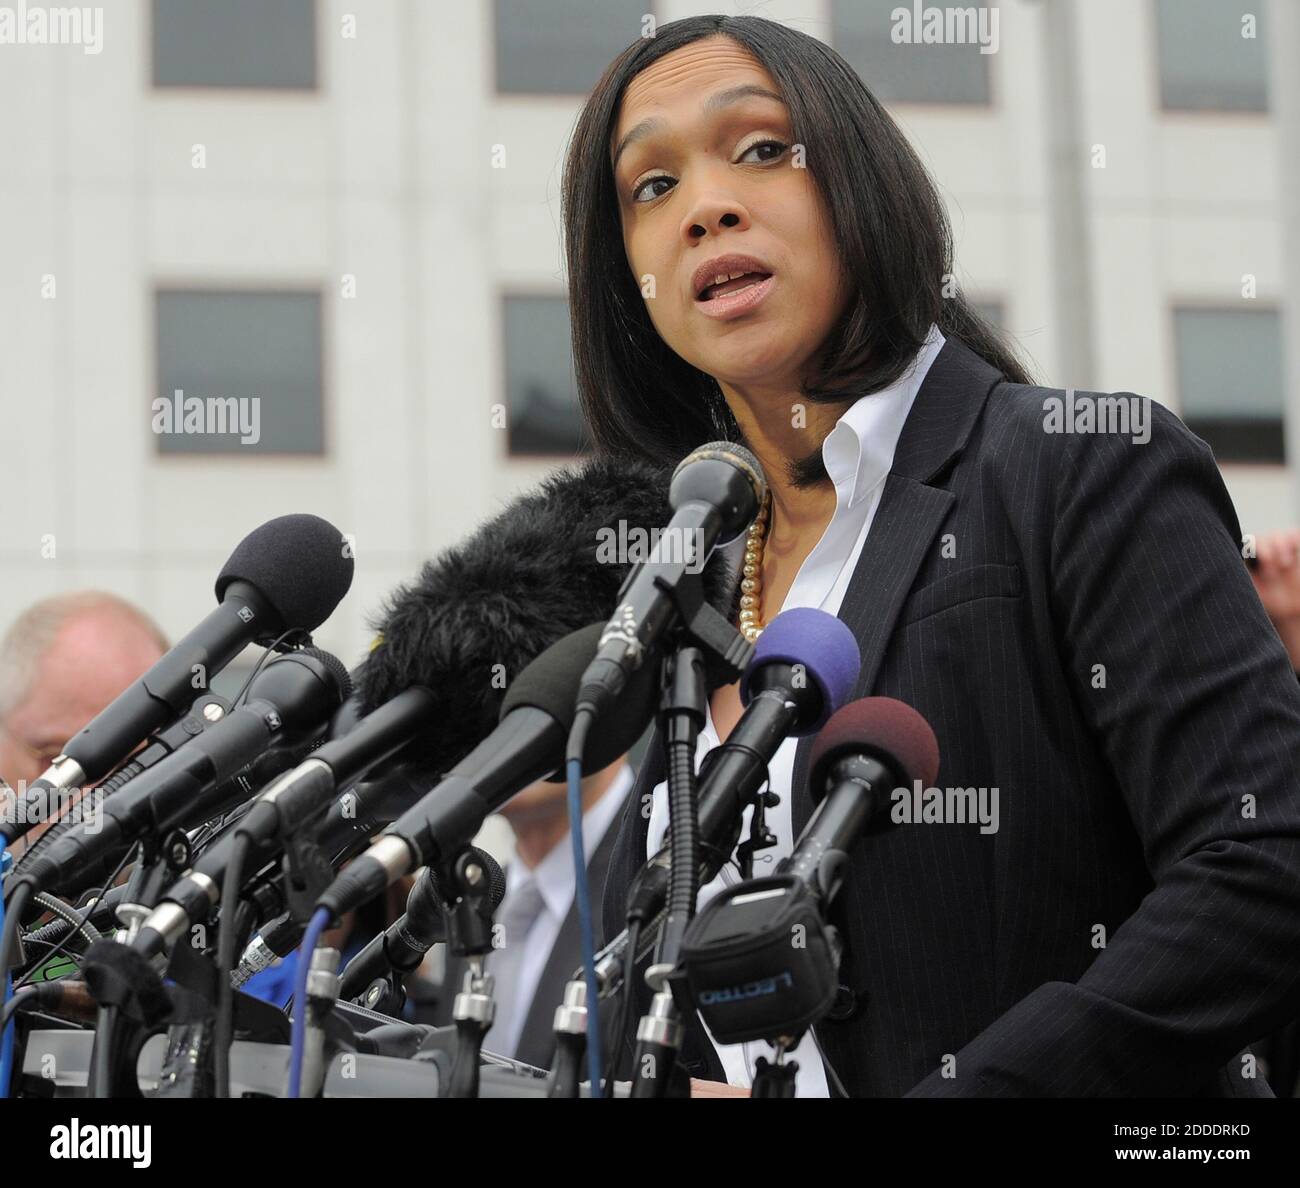 NO FILM, NO VIDEO, NO TV, NO DOCUMENTARY - Baltimore State Attorney Marilyn Mosby answers questions at a press conference outside the War Memorial Building on May 1, 2015, talking about the arrests of police officers involved in the death of Freddie Gray in Baltimore, MD, USA. Photo by Lloyd Fox/Baltimore Sun/TNS/ABACAPRESS.COM Stock Photo